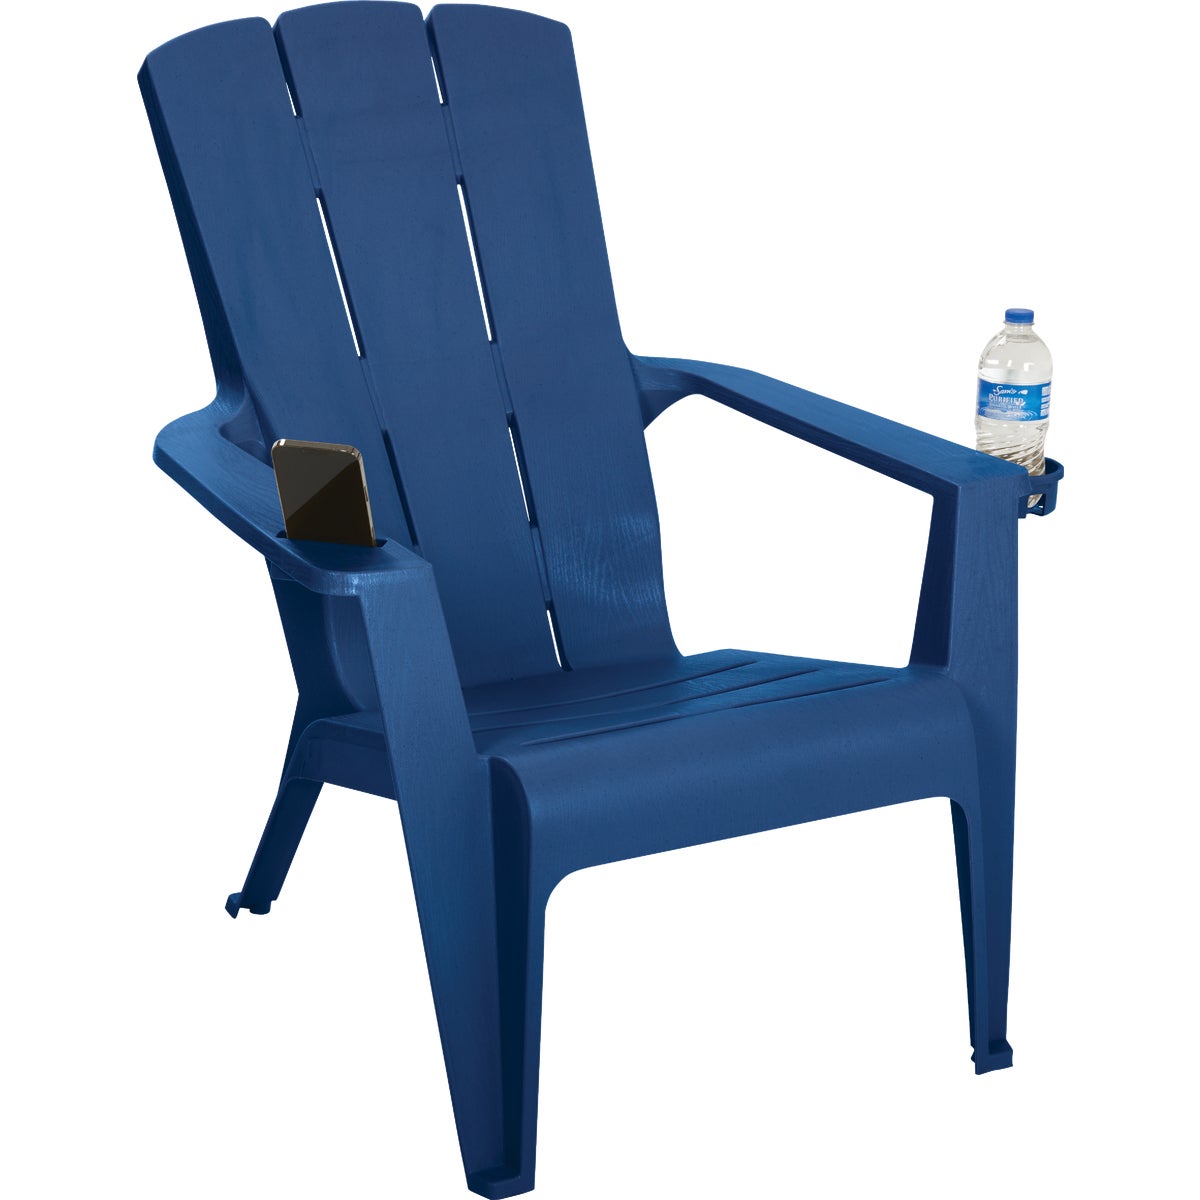 Gracious Living Waterloo Blue Deluxe Contour Adirondack Chair